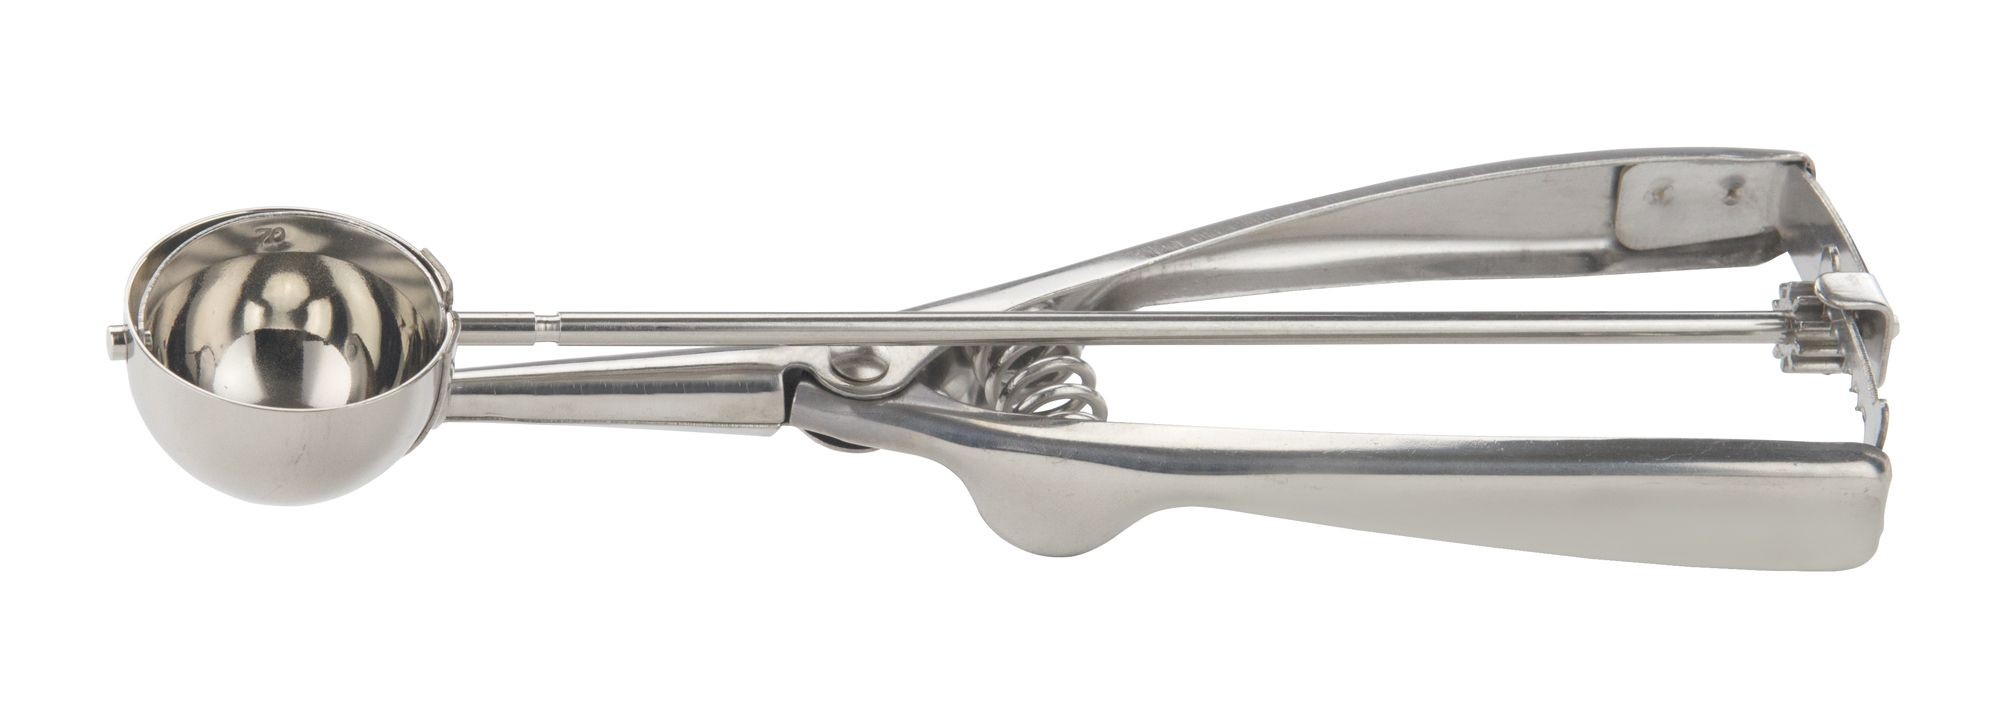 Winco ISS-70 Stainless Steel 1/2 oz. Disher/Portioner, Size 70